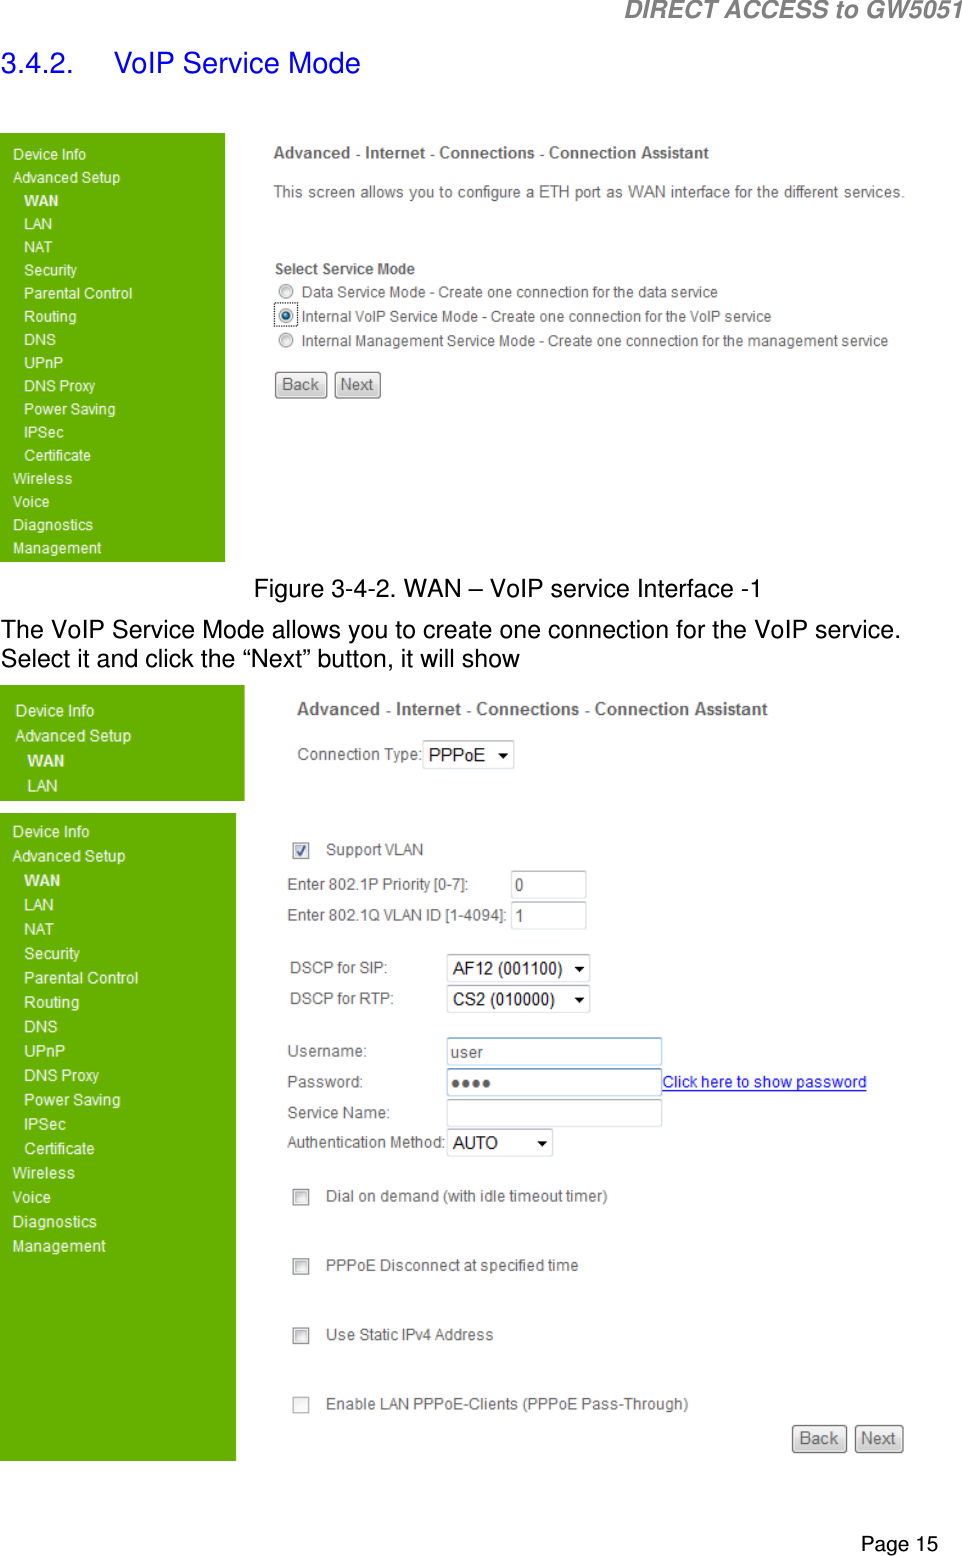                                                                                                                                                                                                                           DIRECT ACCESS to GW5051    Page 15 3.4.2.  VoIP Service Mode   Figure 3-4-2. WAN – VoIP service Interface -1 The VoIP Service Mode allows you to create one connection for the VoIP service. Select it and click the “Next” button, it will show   